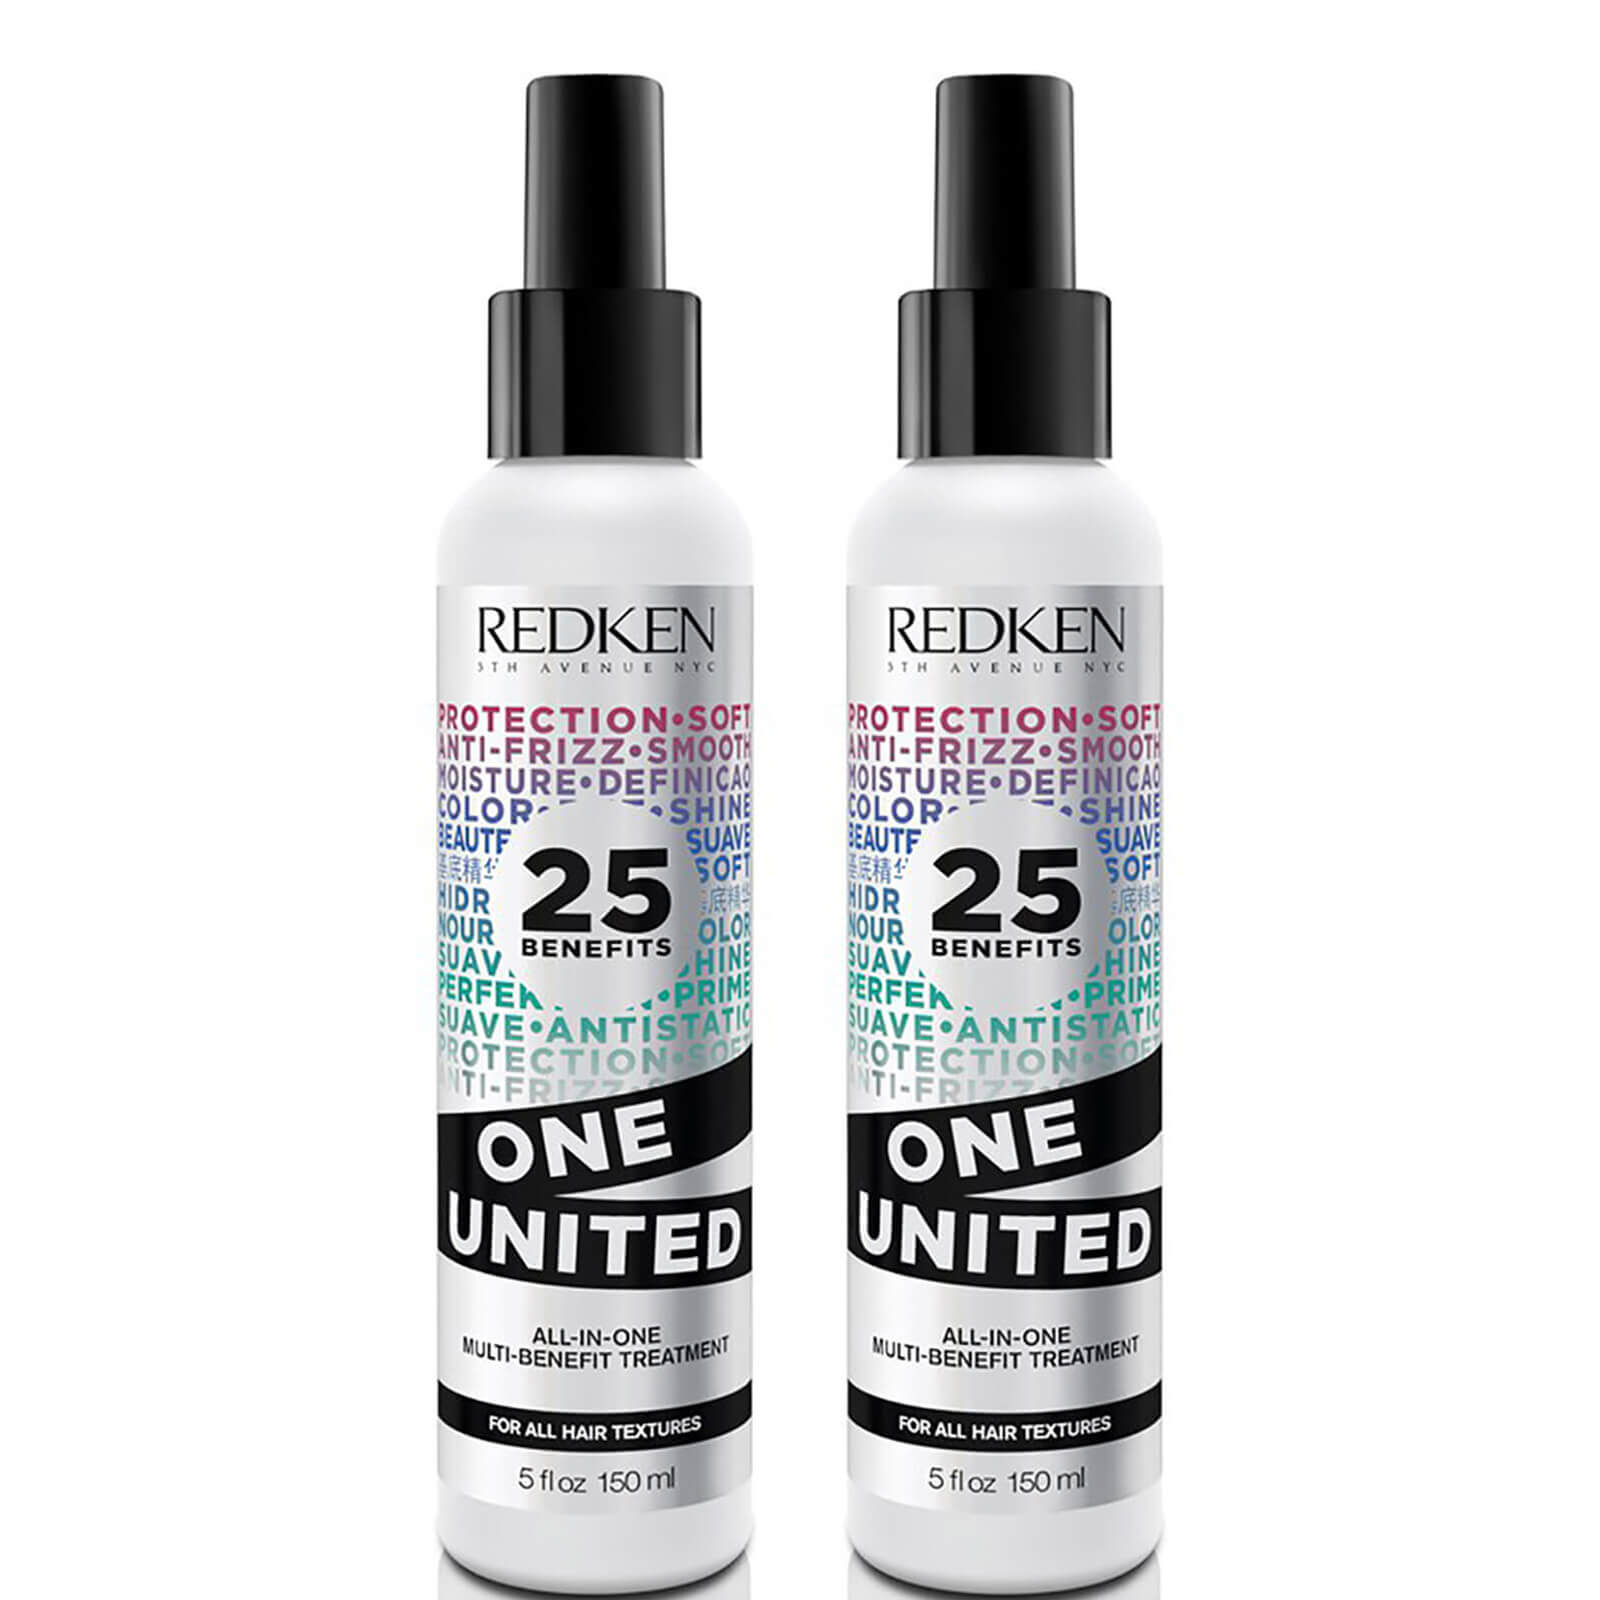 Image of Redken One United Multi-Benefit Treatment Duo (2 x 150 ml)